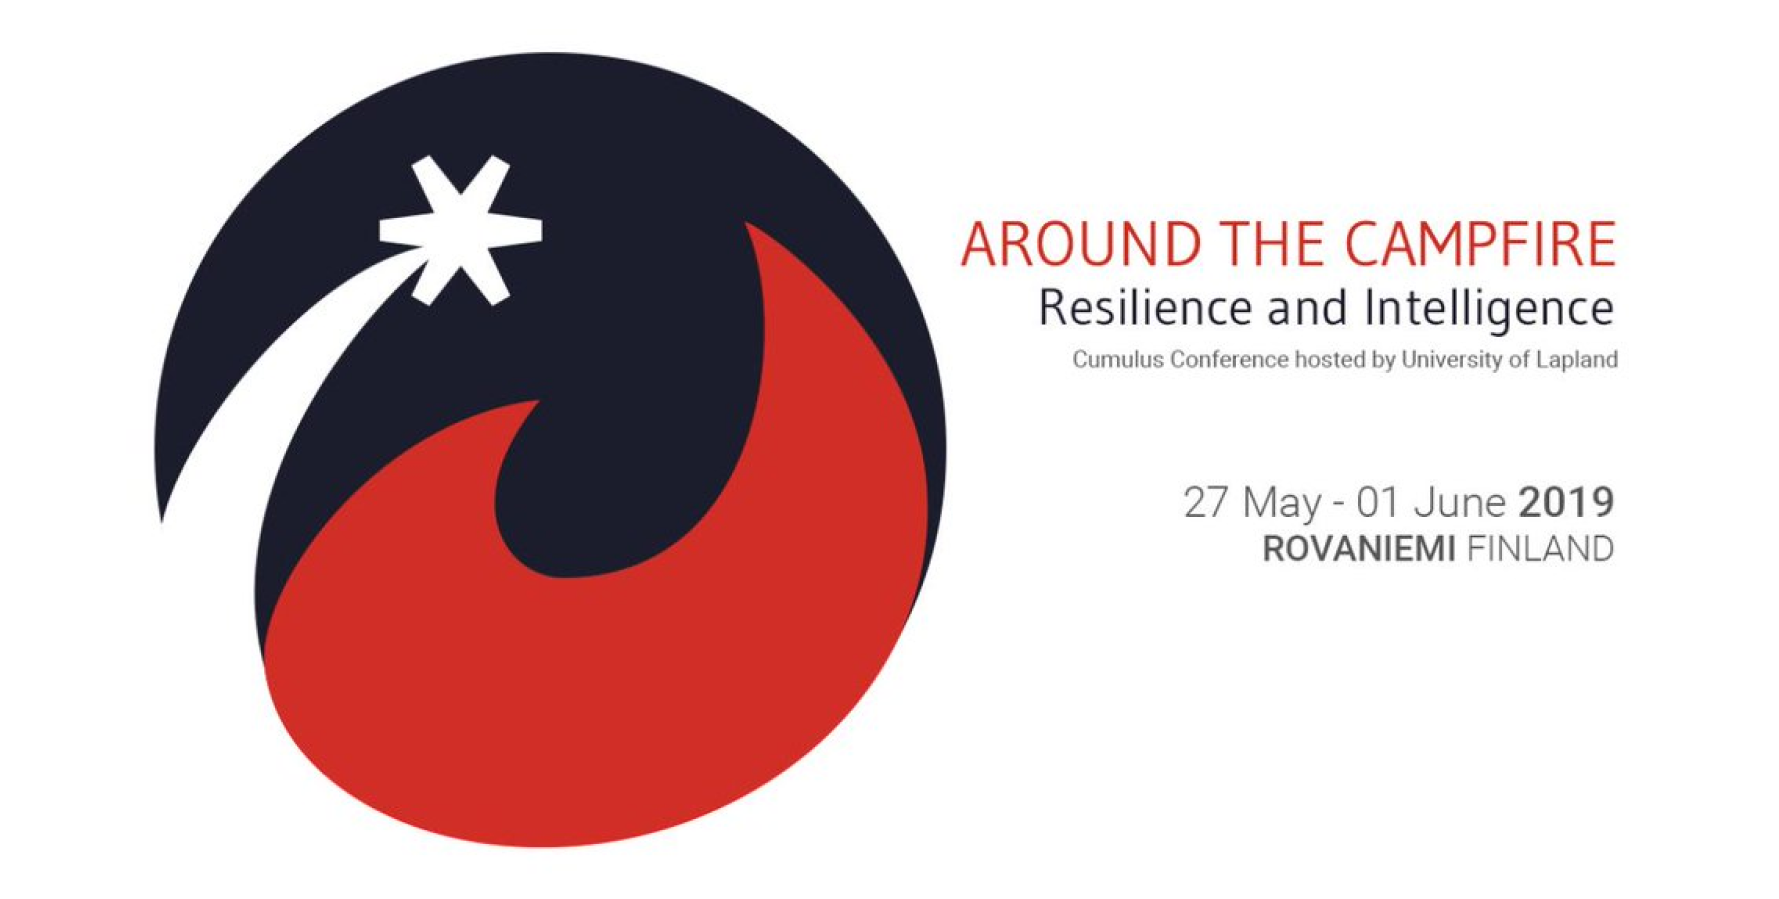 Around the Campfire – Resilience and Intelligence